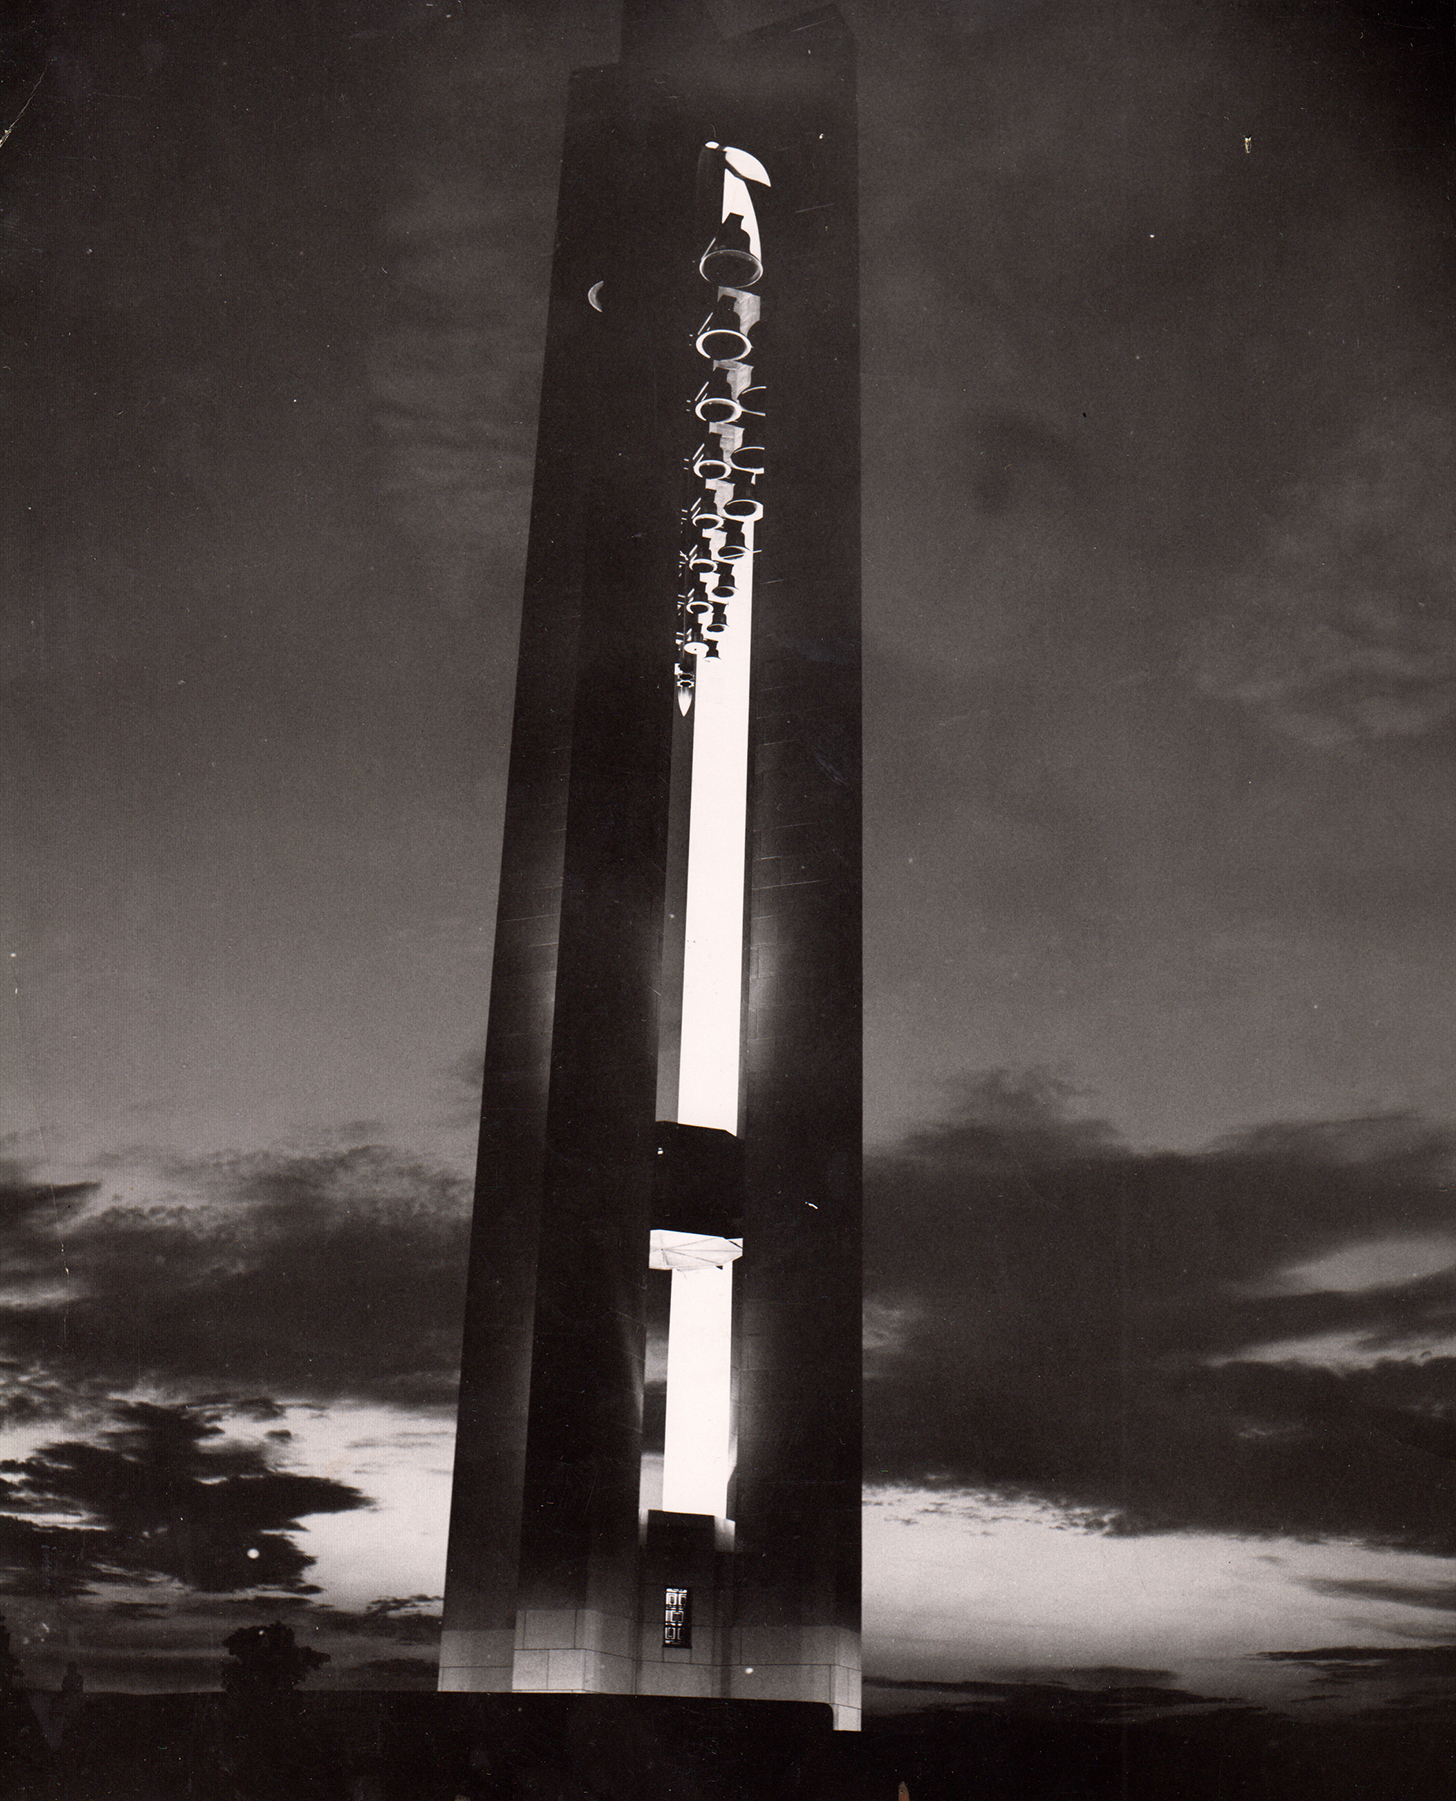 Deeds Carillon at sunset, July 1953